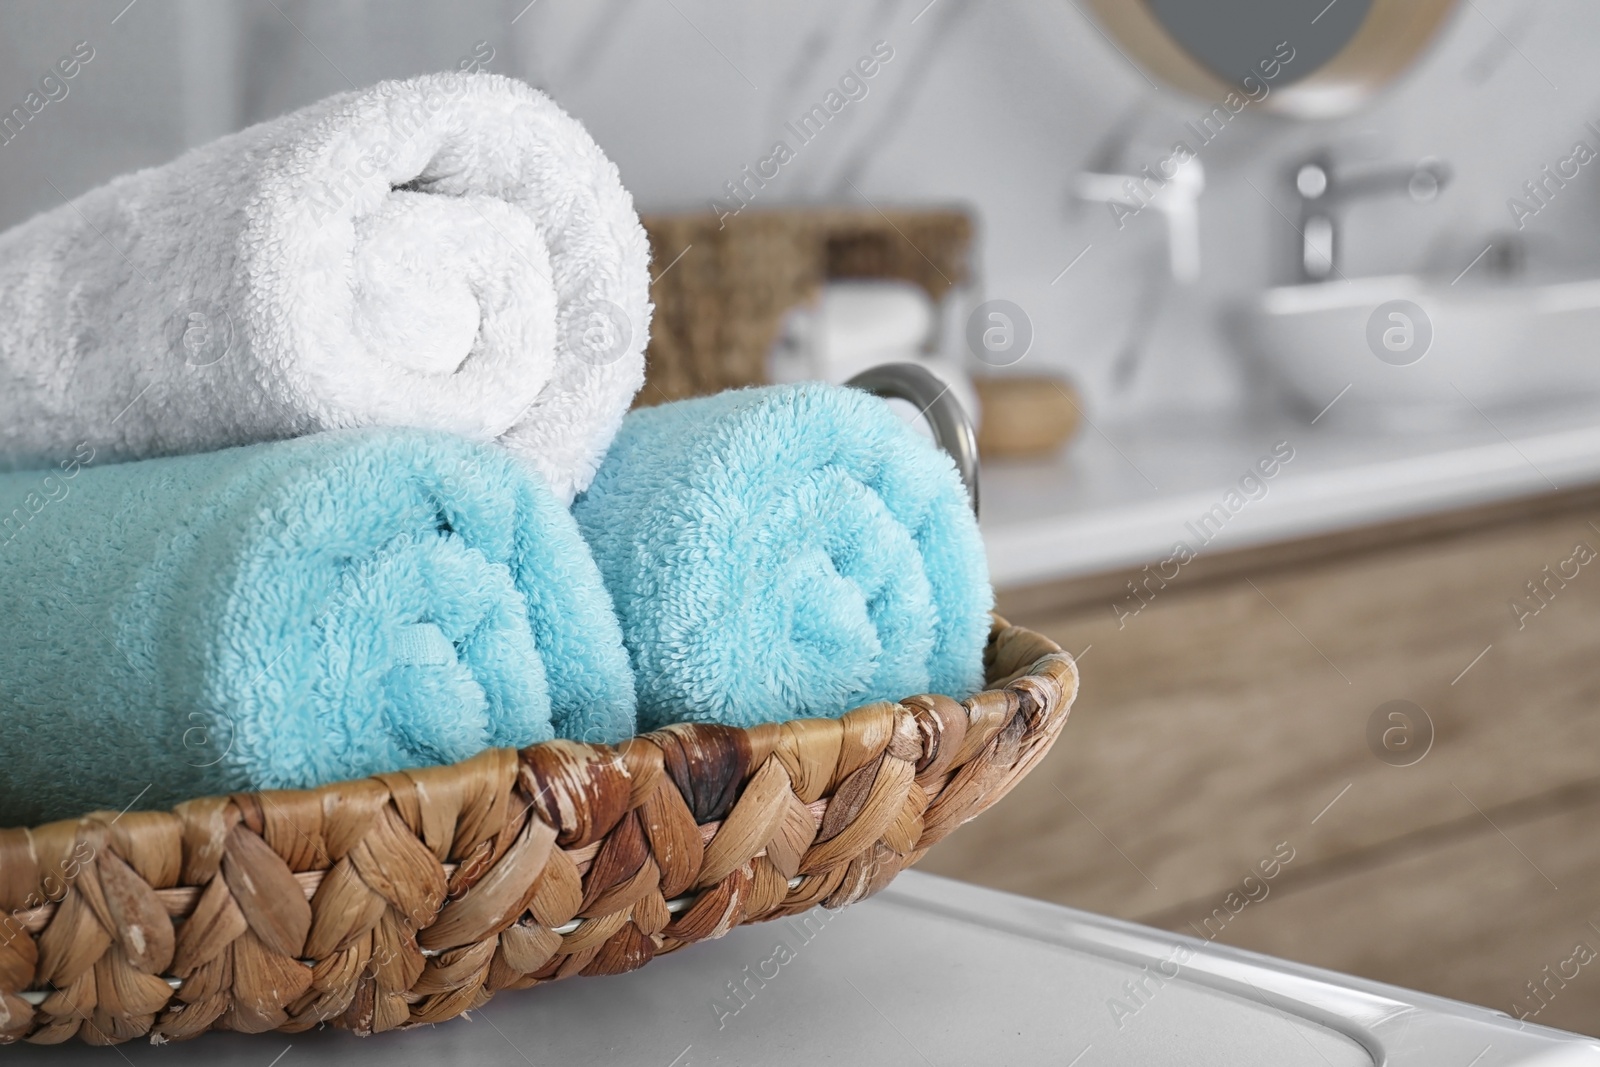 Photo of Wicker tray with clean soft towels in bathroom, closeup